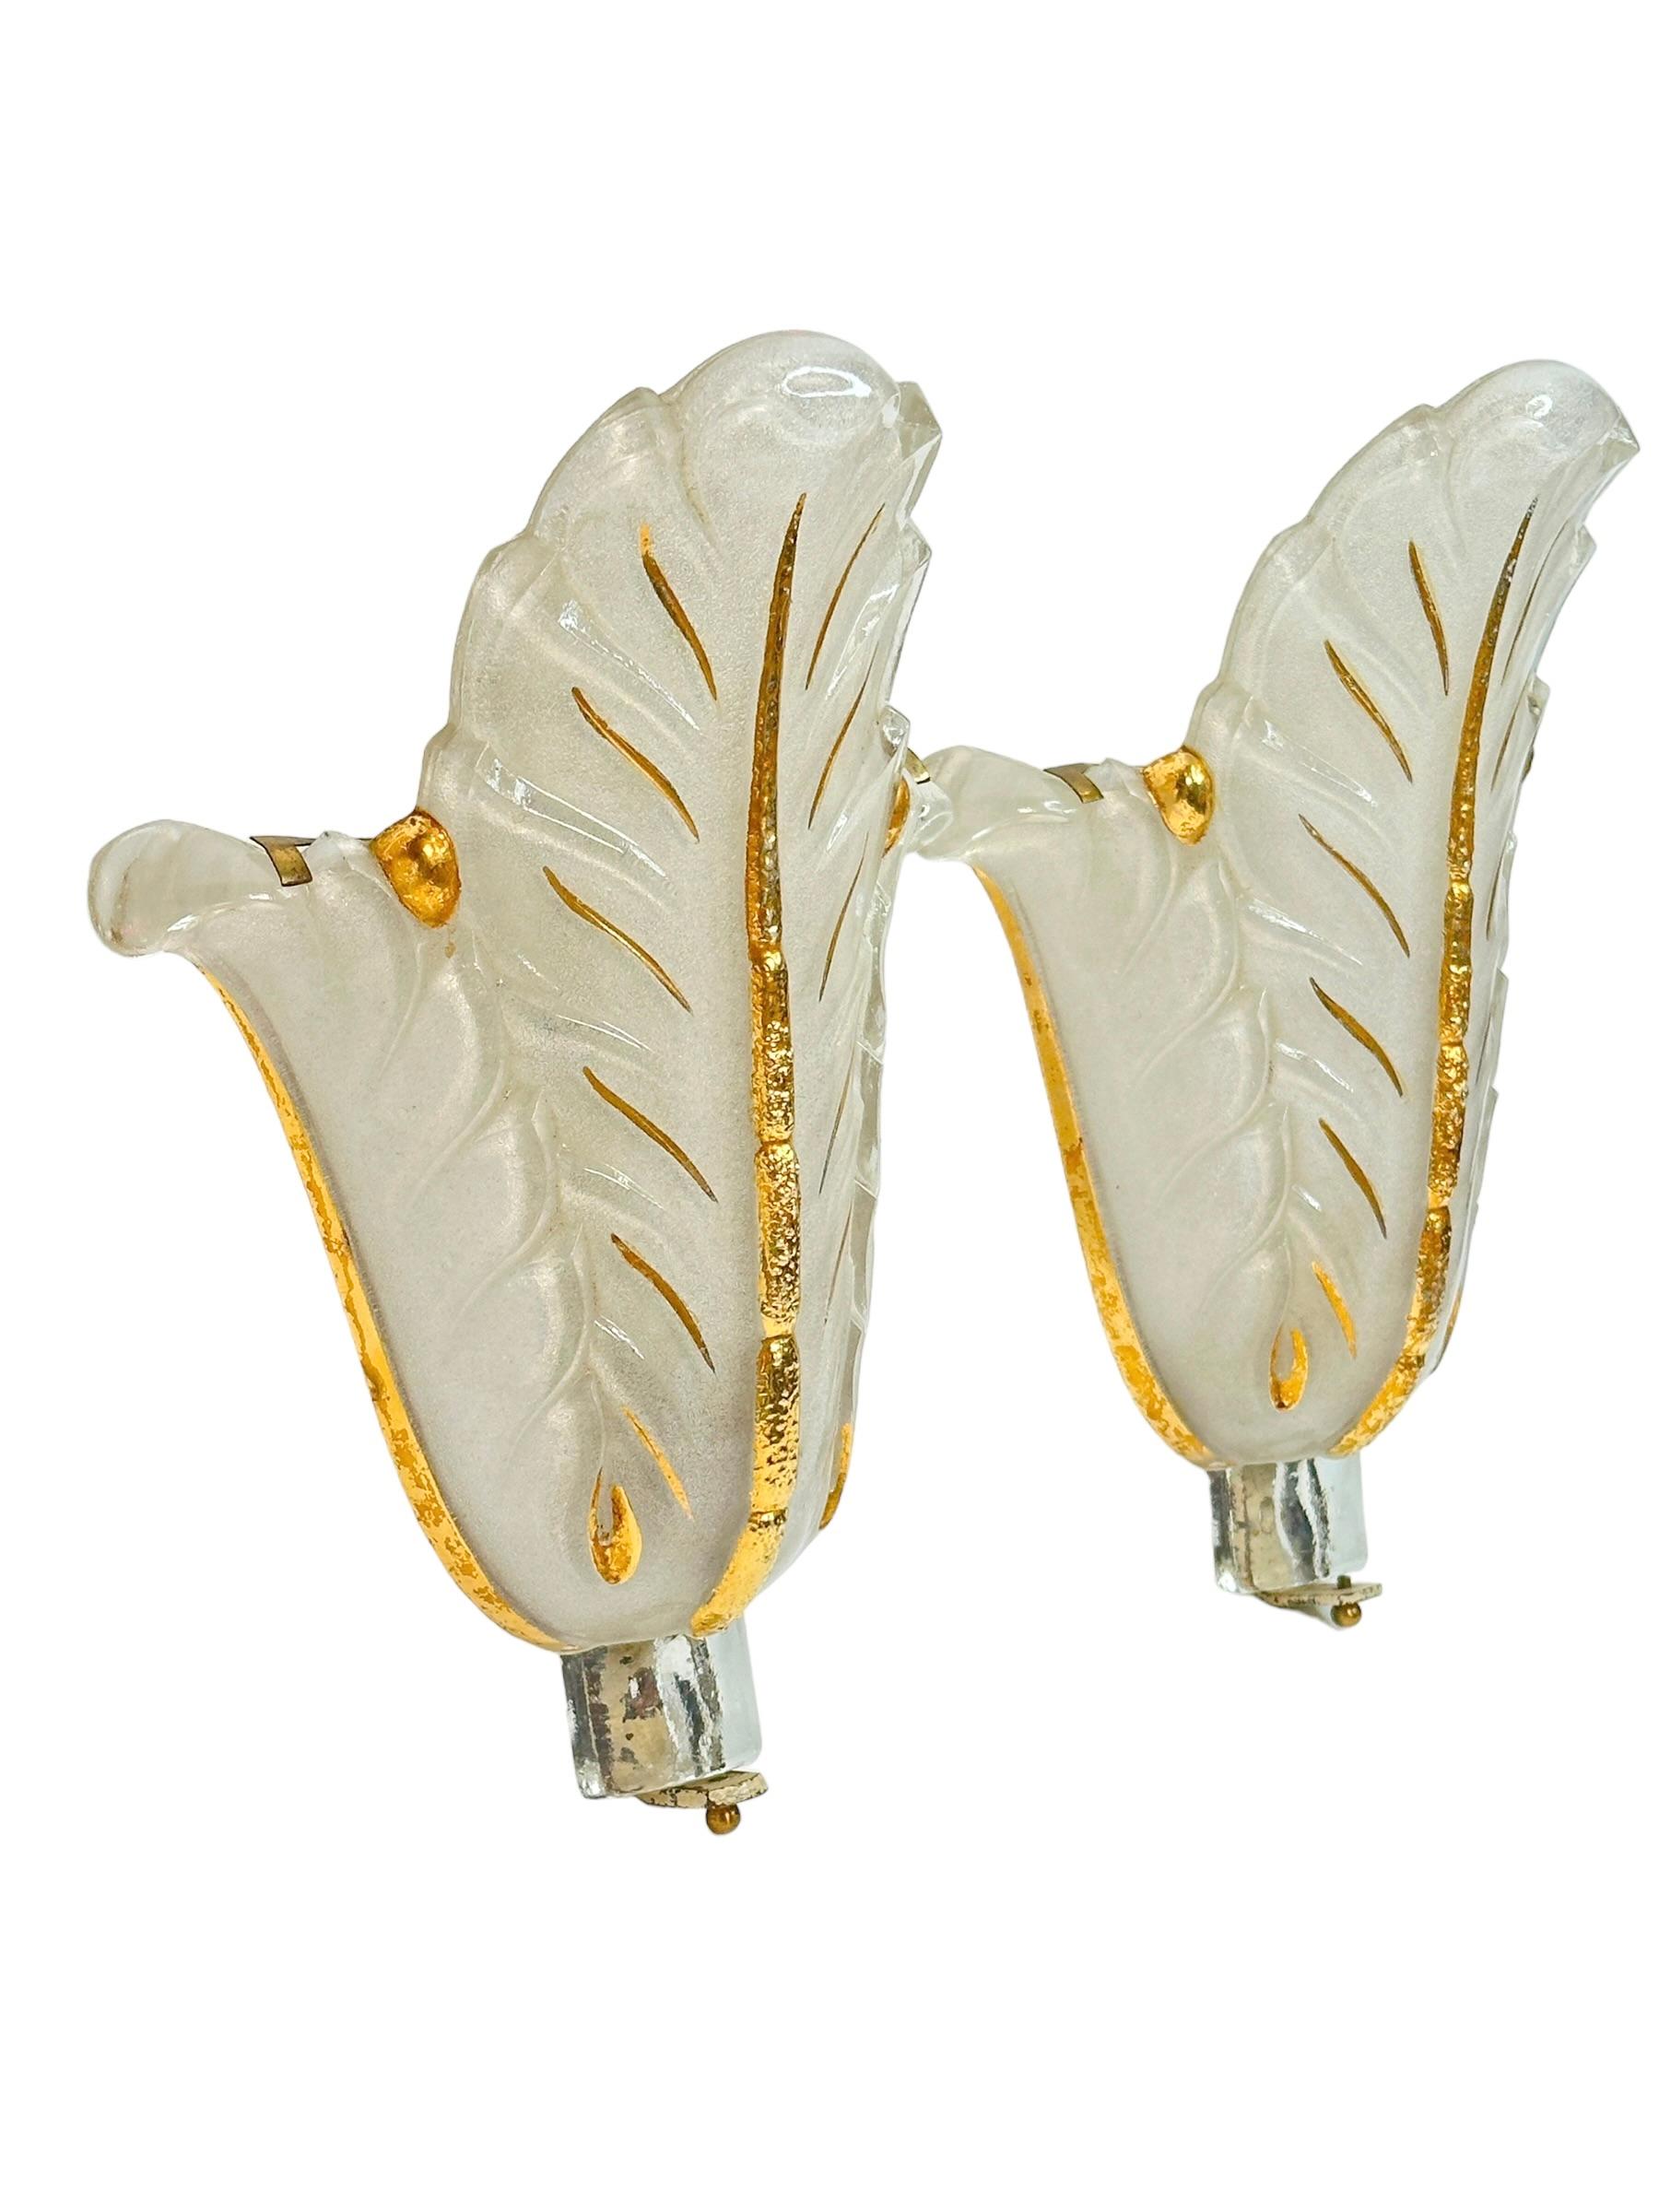 Pair of Jean Gauthier Art Deco Glass Sconces 1930s French For Sale 1